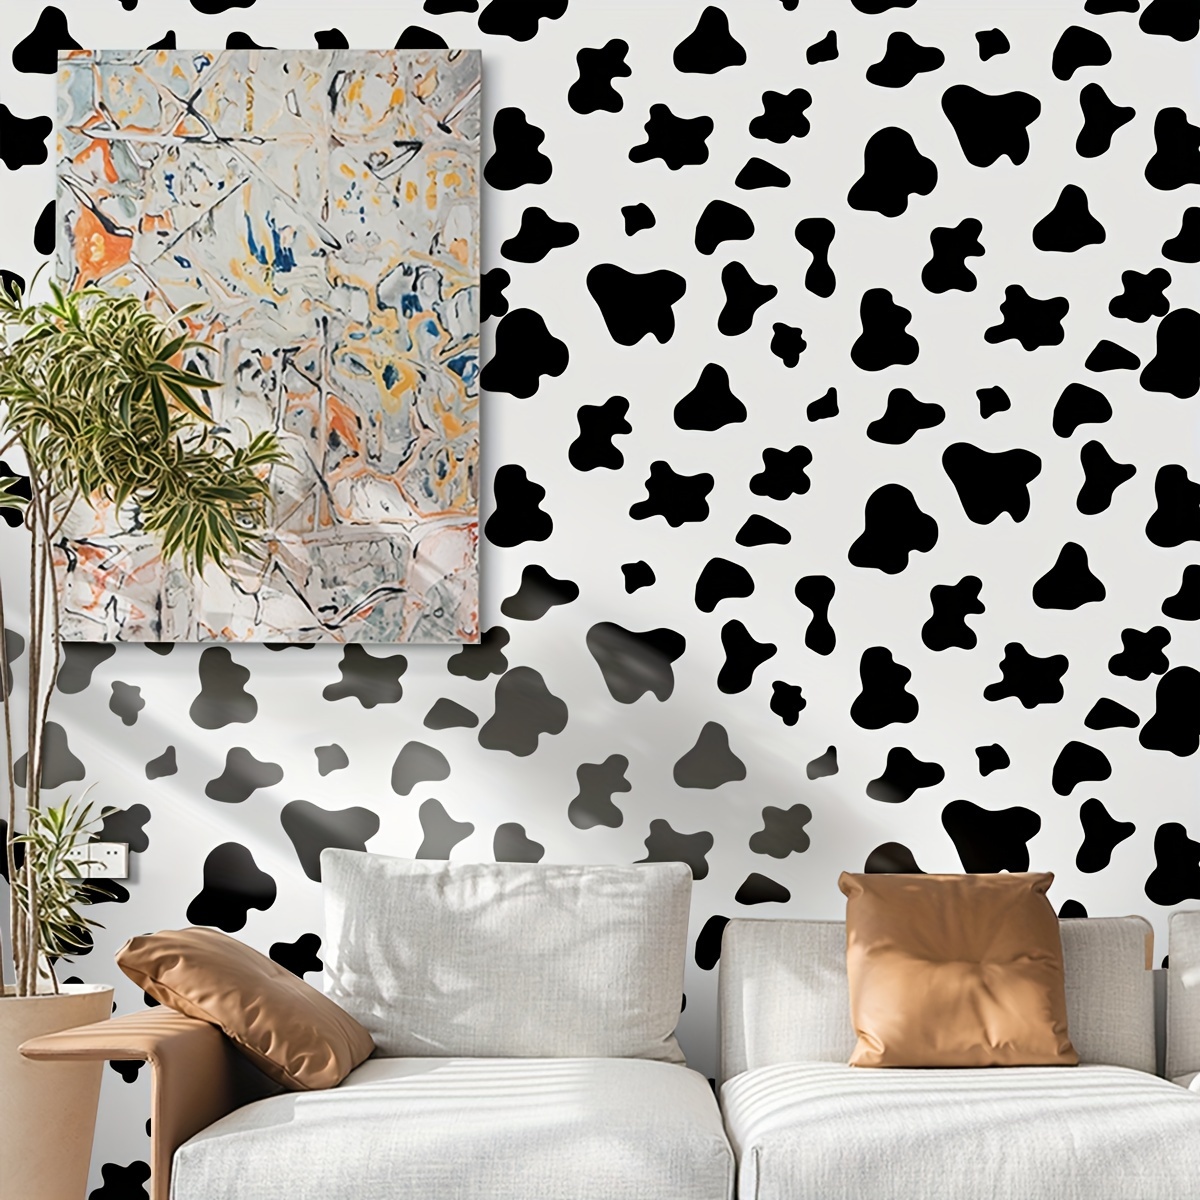 Black and White Spots Contact Paper Peel and Stick Wallpaper Cow Print  Wallpaper Self Adhesive Modern Dot Removable Decorative Wallpaper for  Living